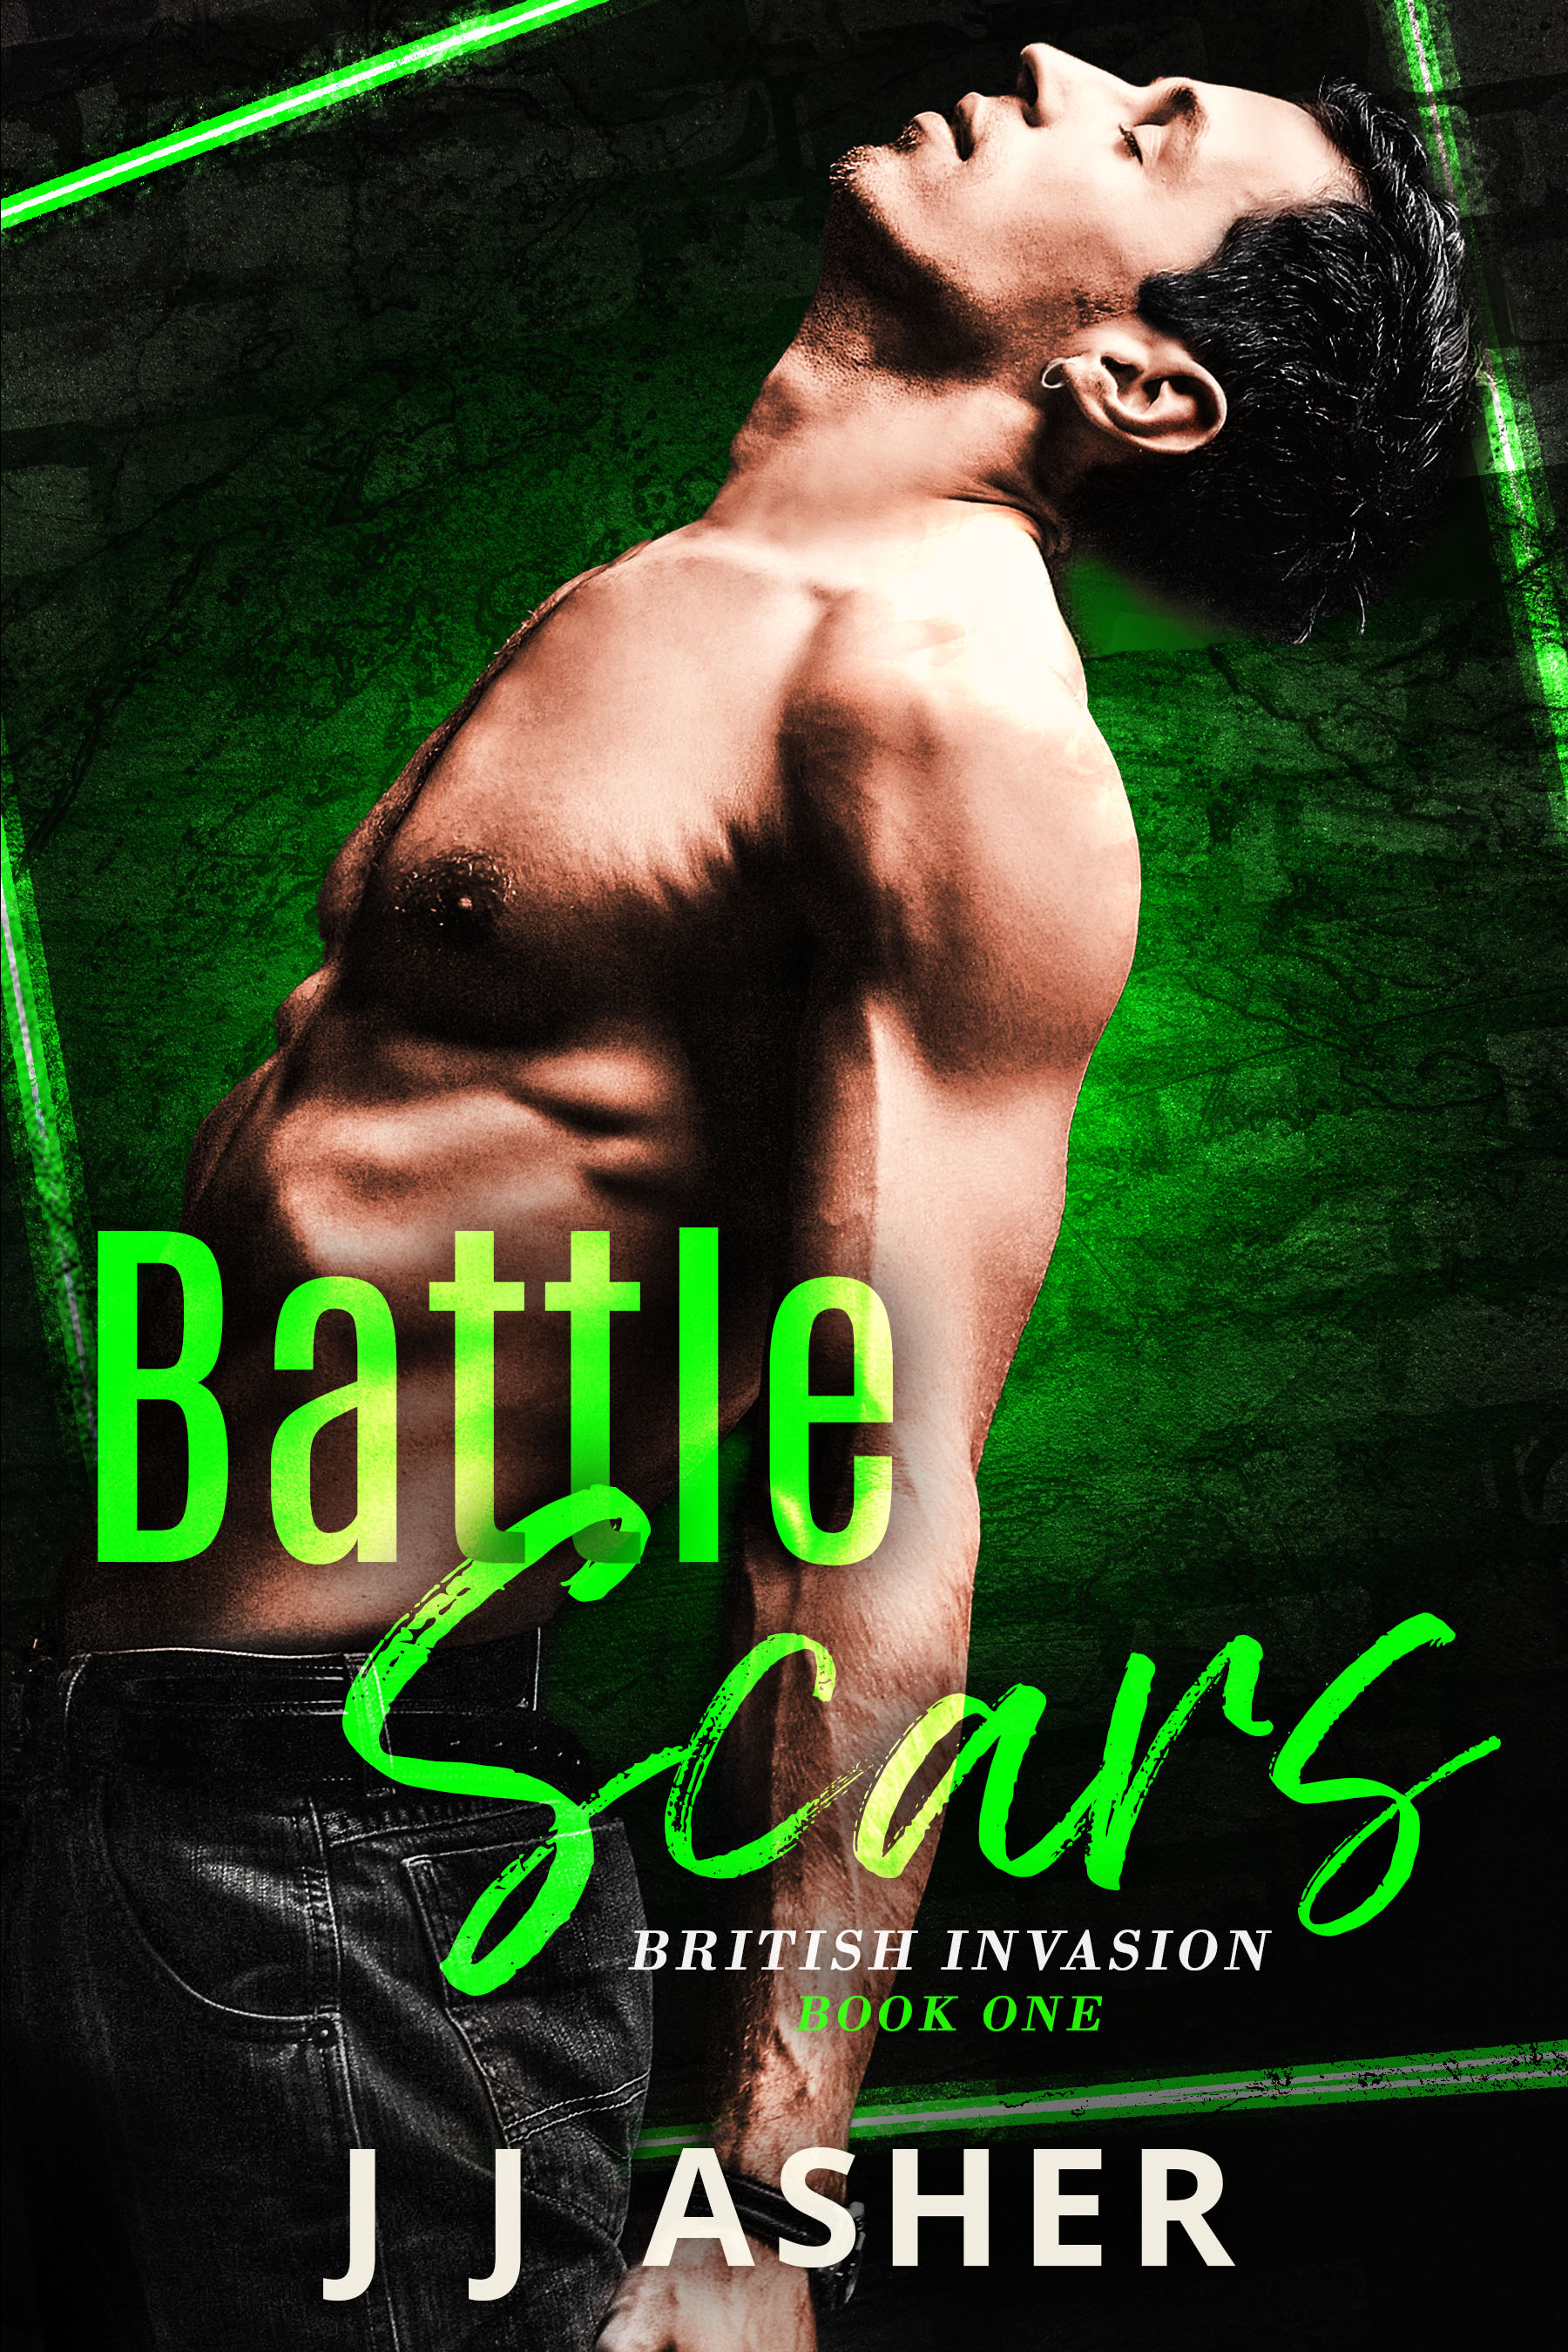 Battle Scars Ecover - Final new author name